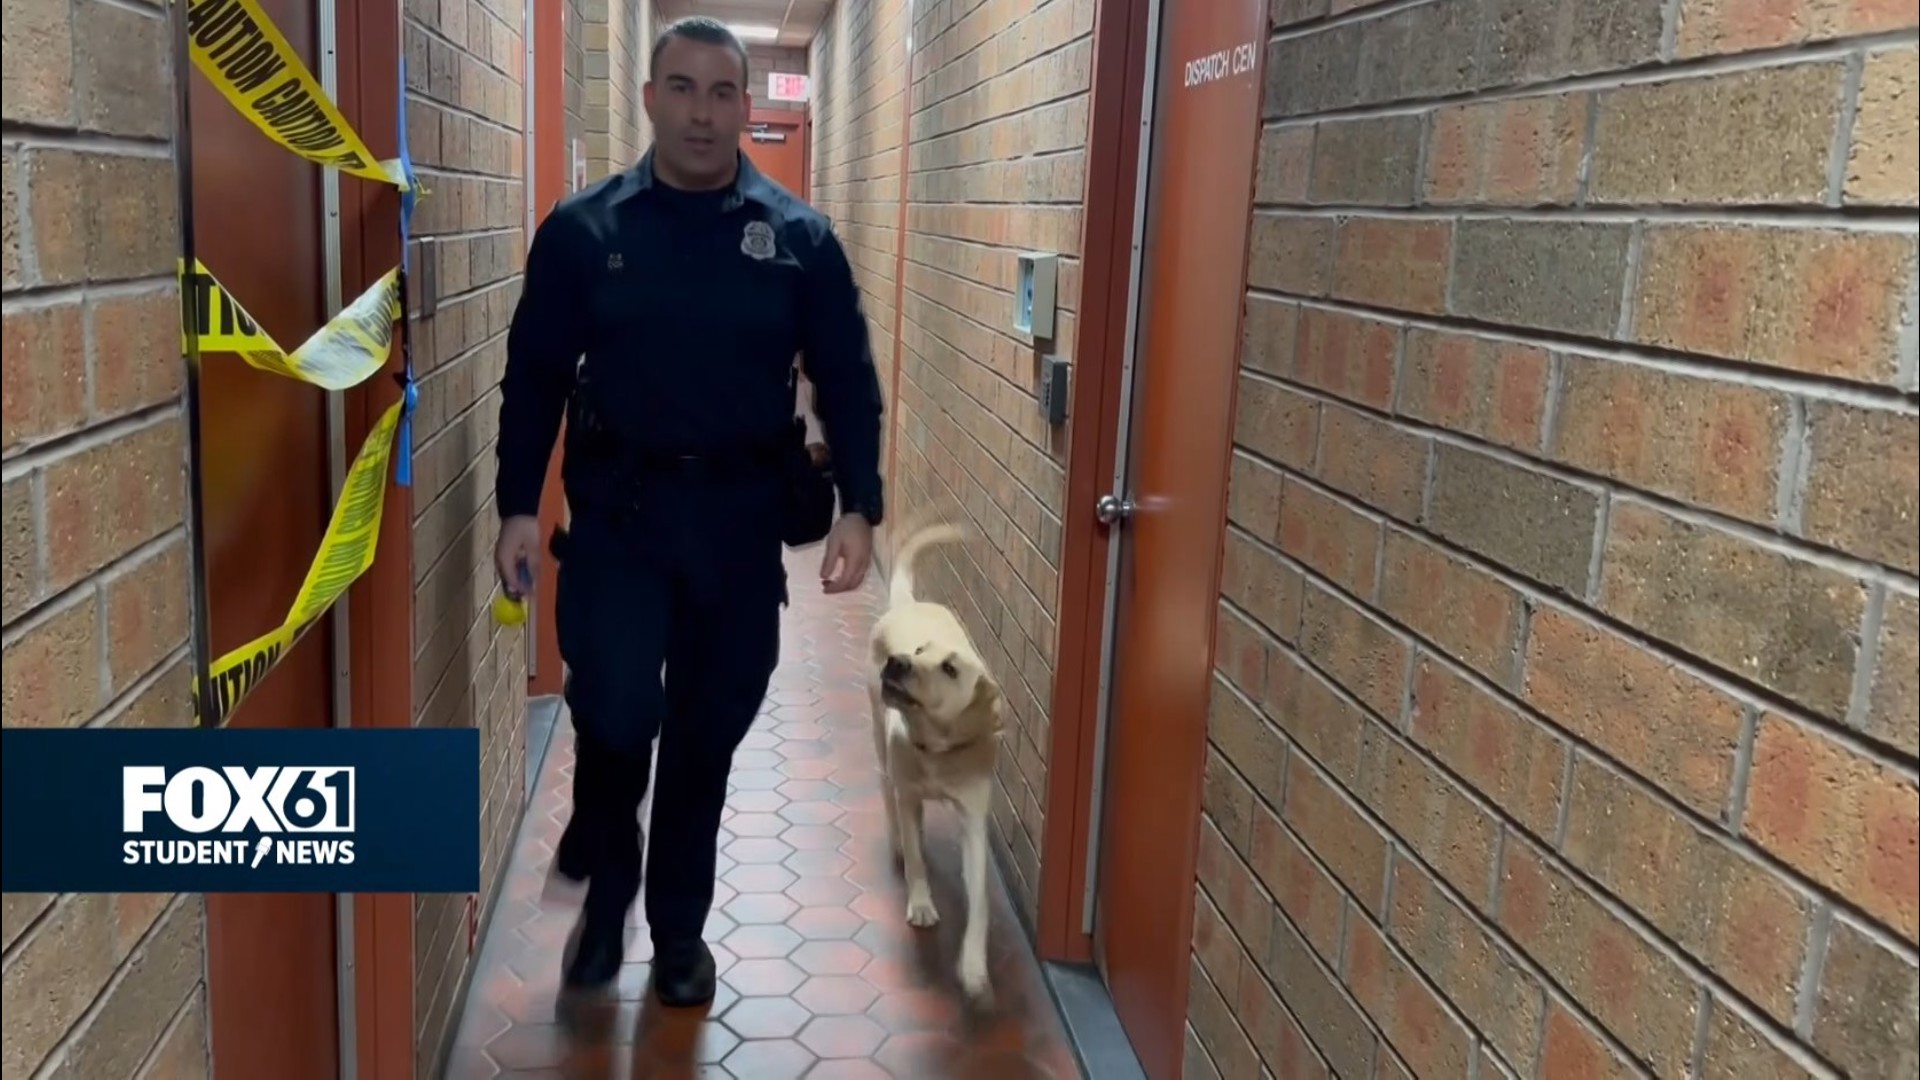 After 11 years of serving on the police department, Officer Cox proposed his idea to work with K-9’s, but not in the typical way.